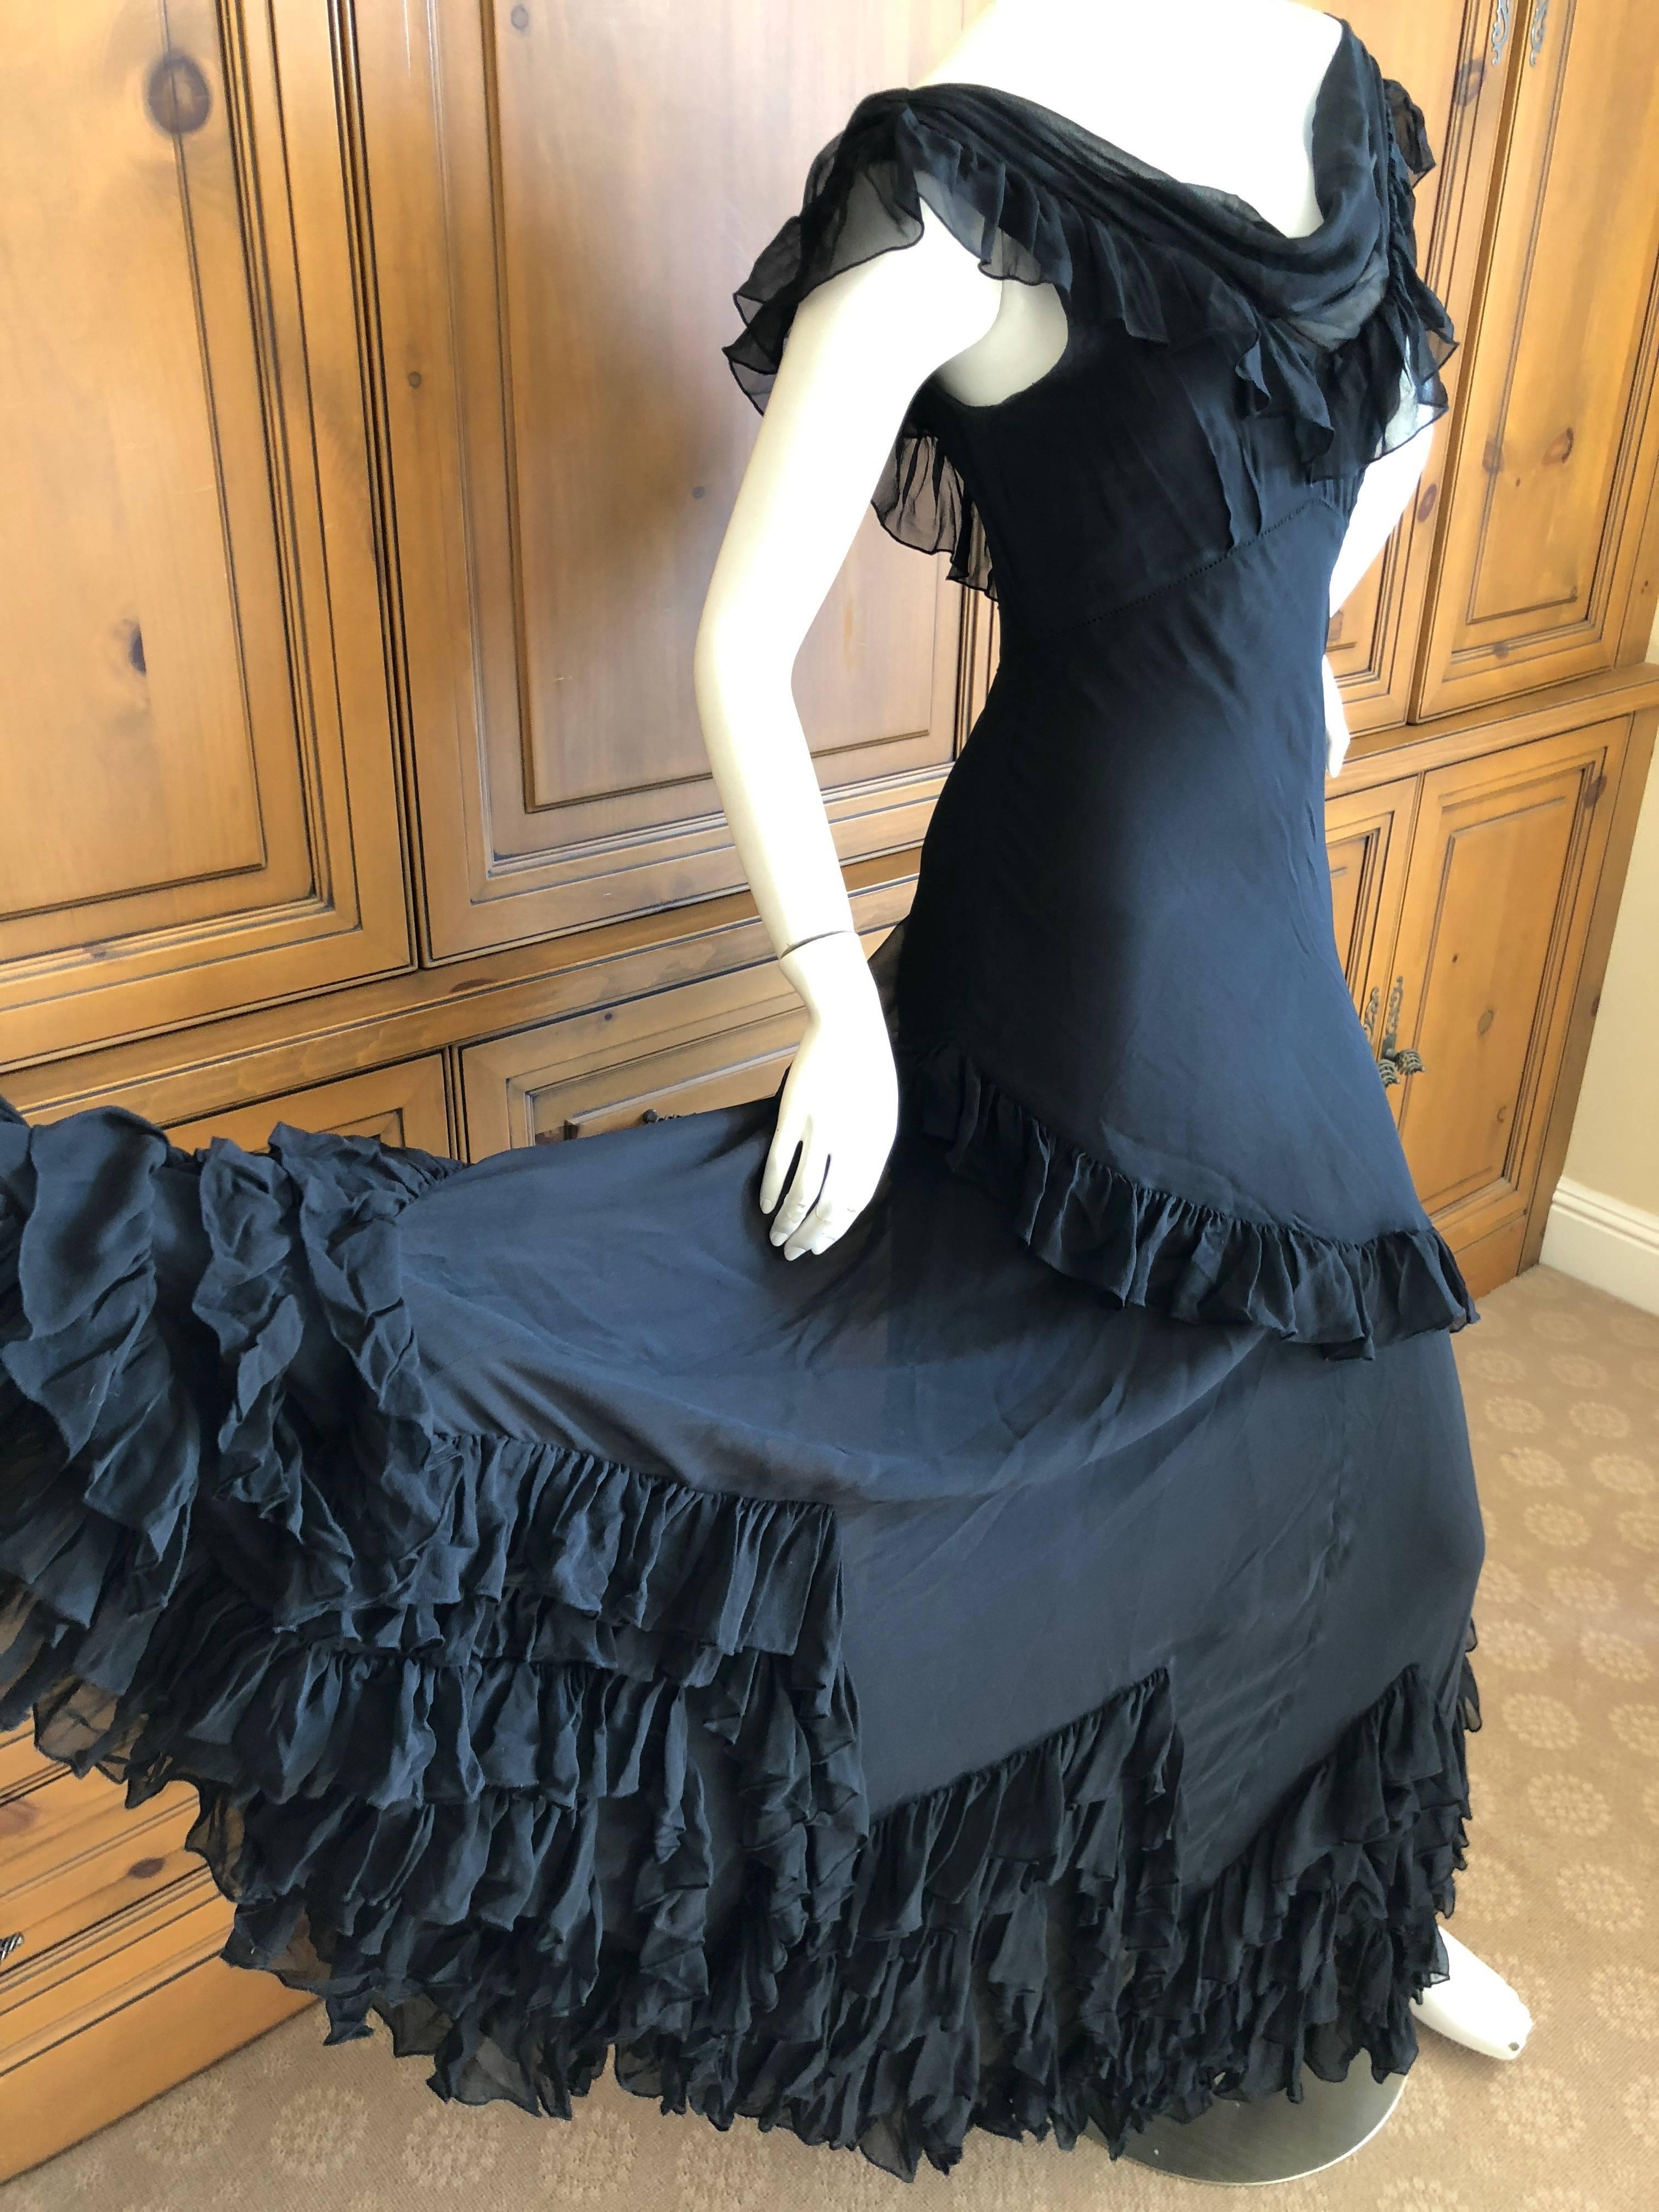  John Galliano Black Sheer Vintage Silk Ruffled Evening Dress with Cowl Back  For Sale 1